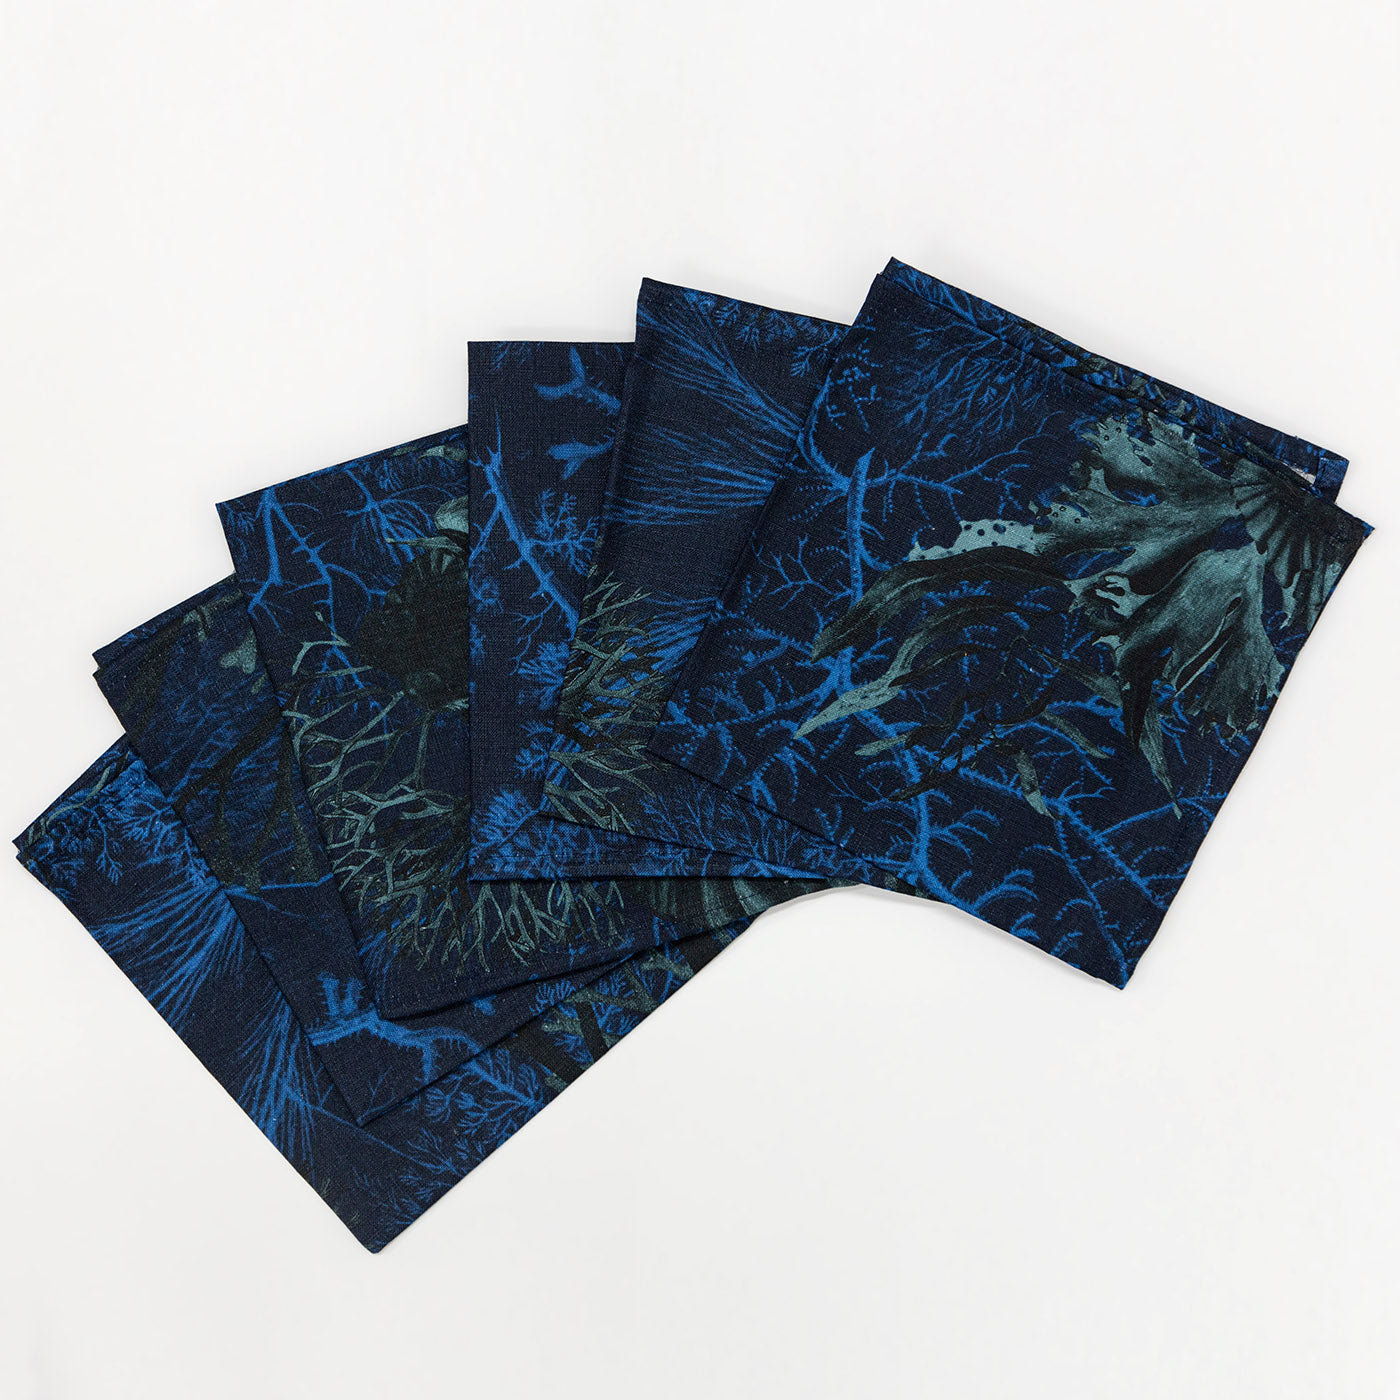 Amami Set Of 6 Linen Napkins With Seaweed Decoration - Alternative view 1